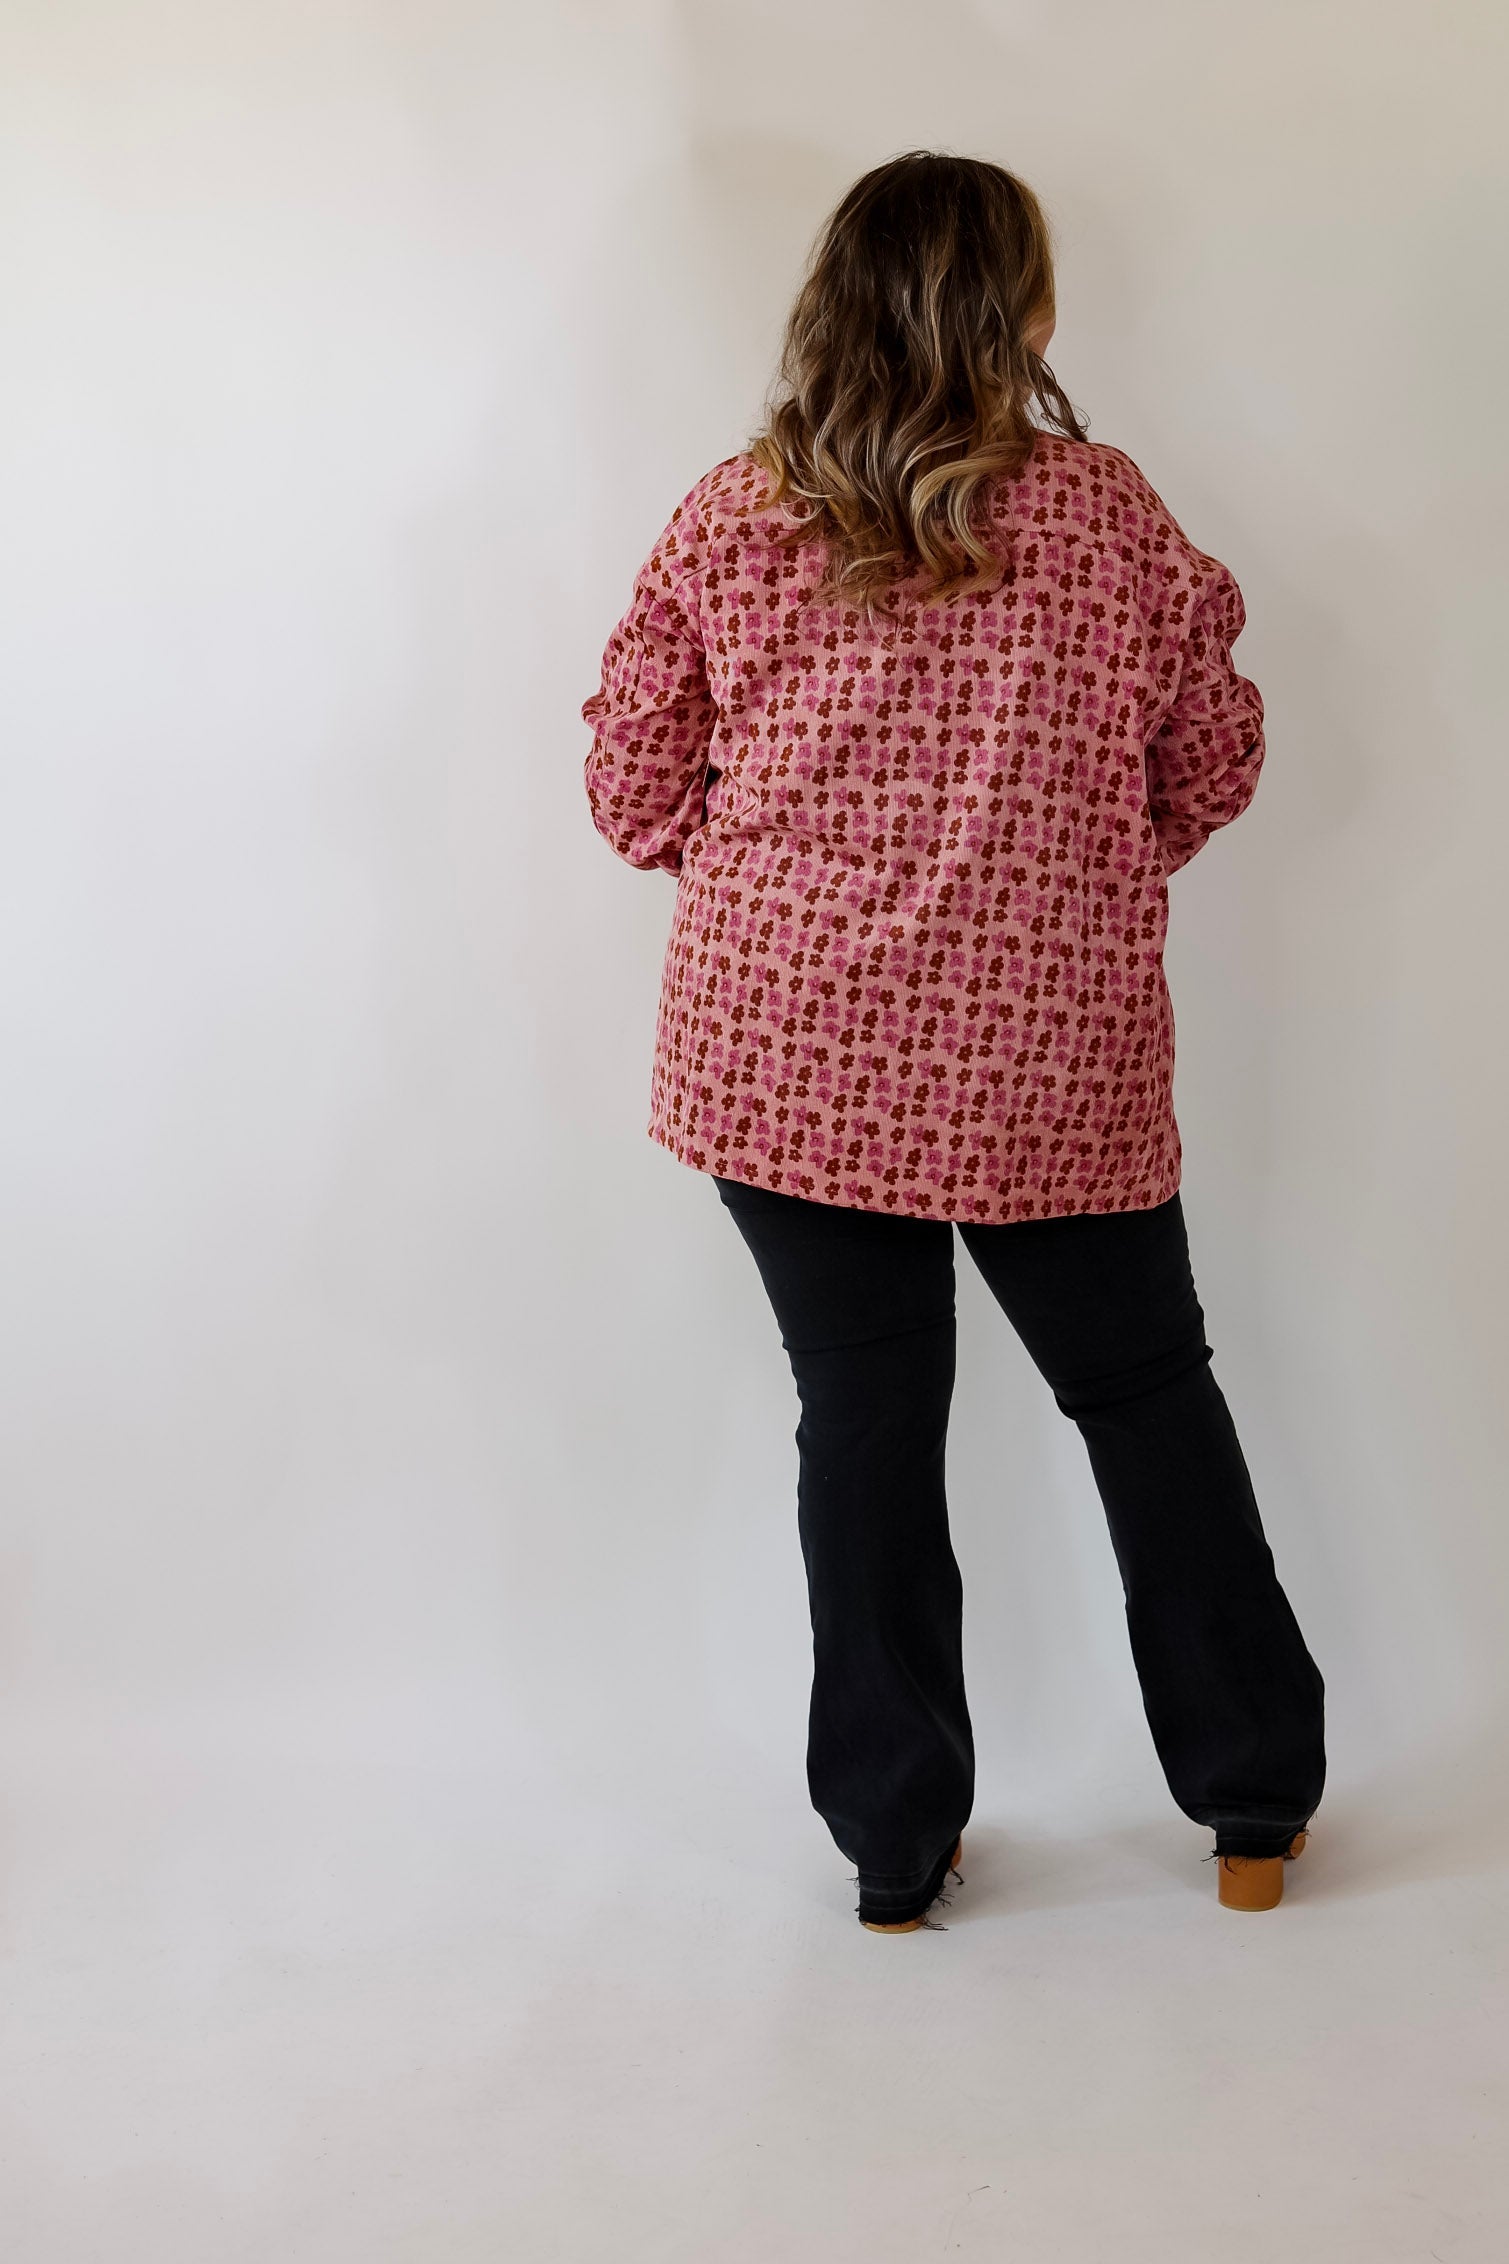 Autumn Brunch Floral Print Corduroy Shacket in Dusty Pink - Giddy Up Glamour Boutique